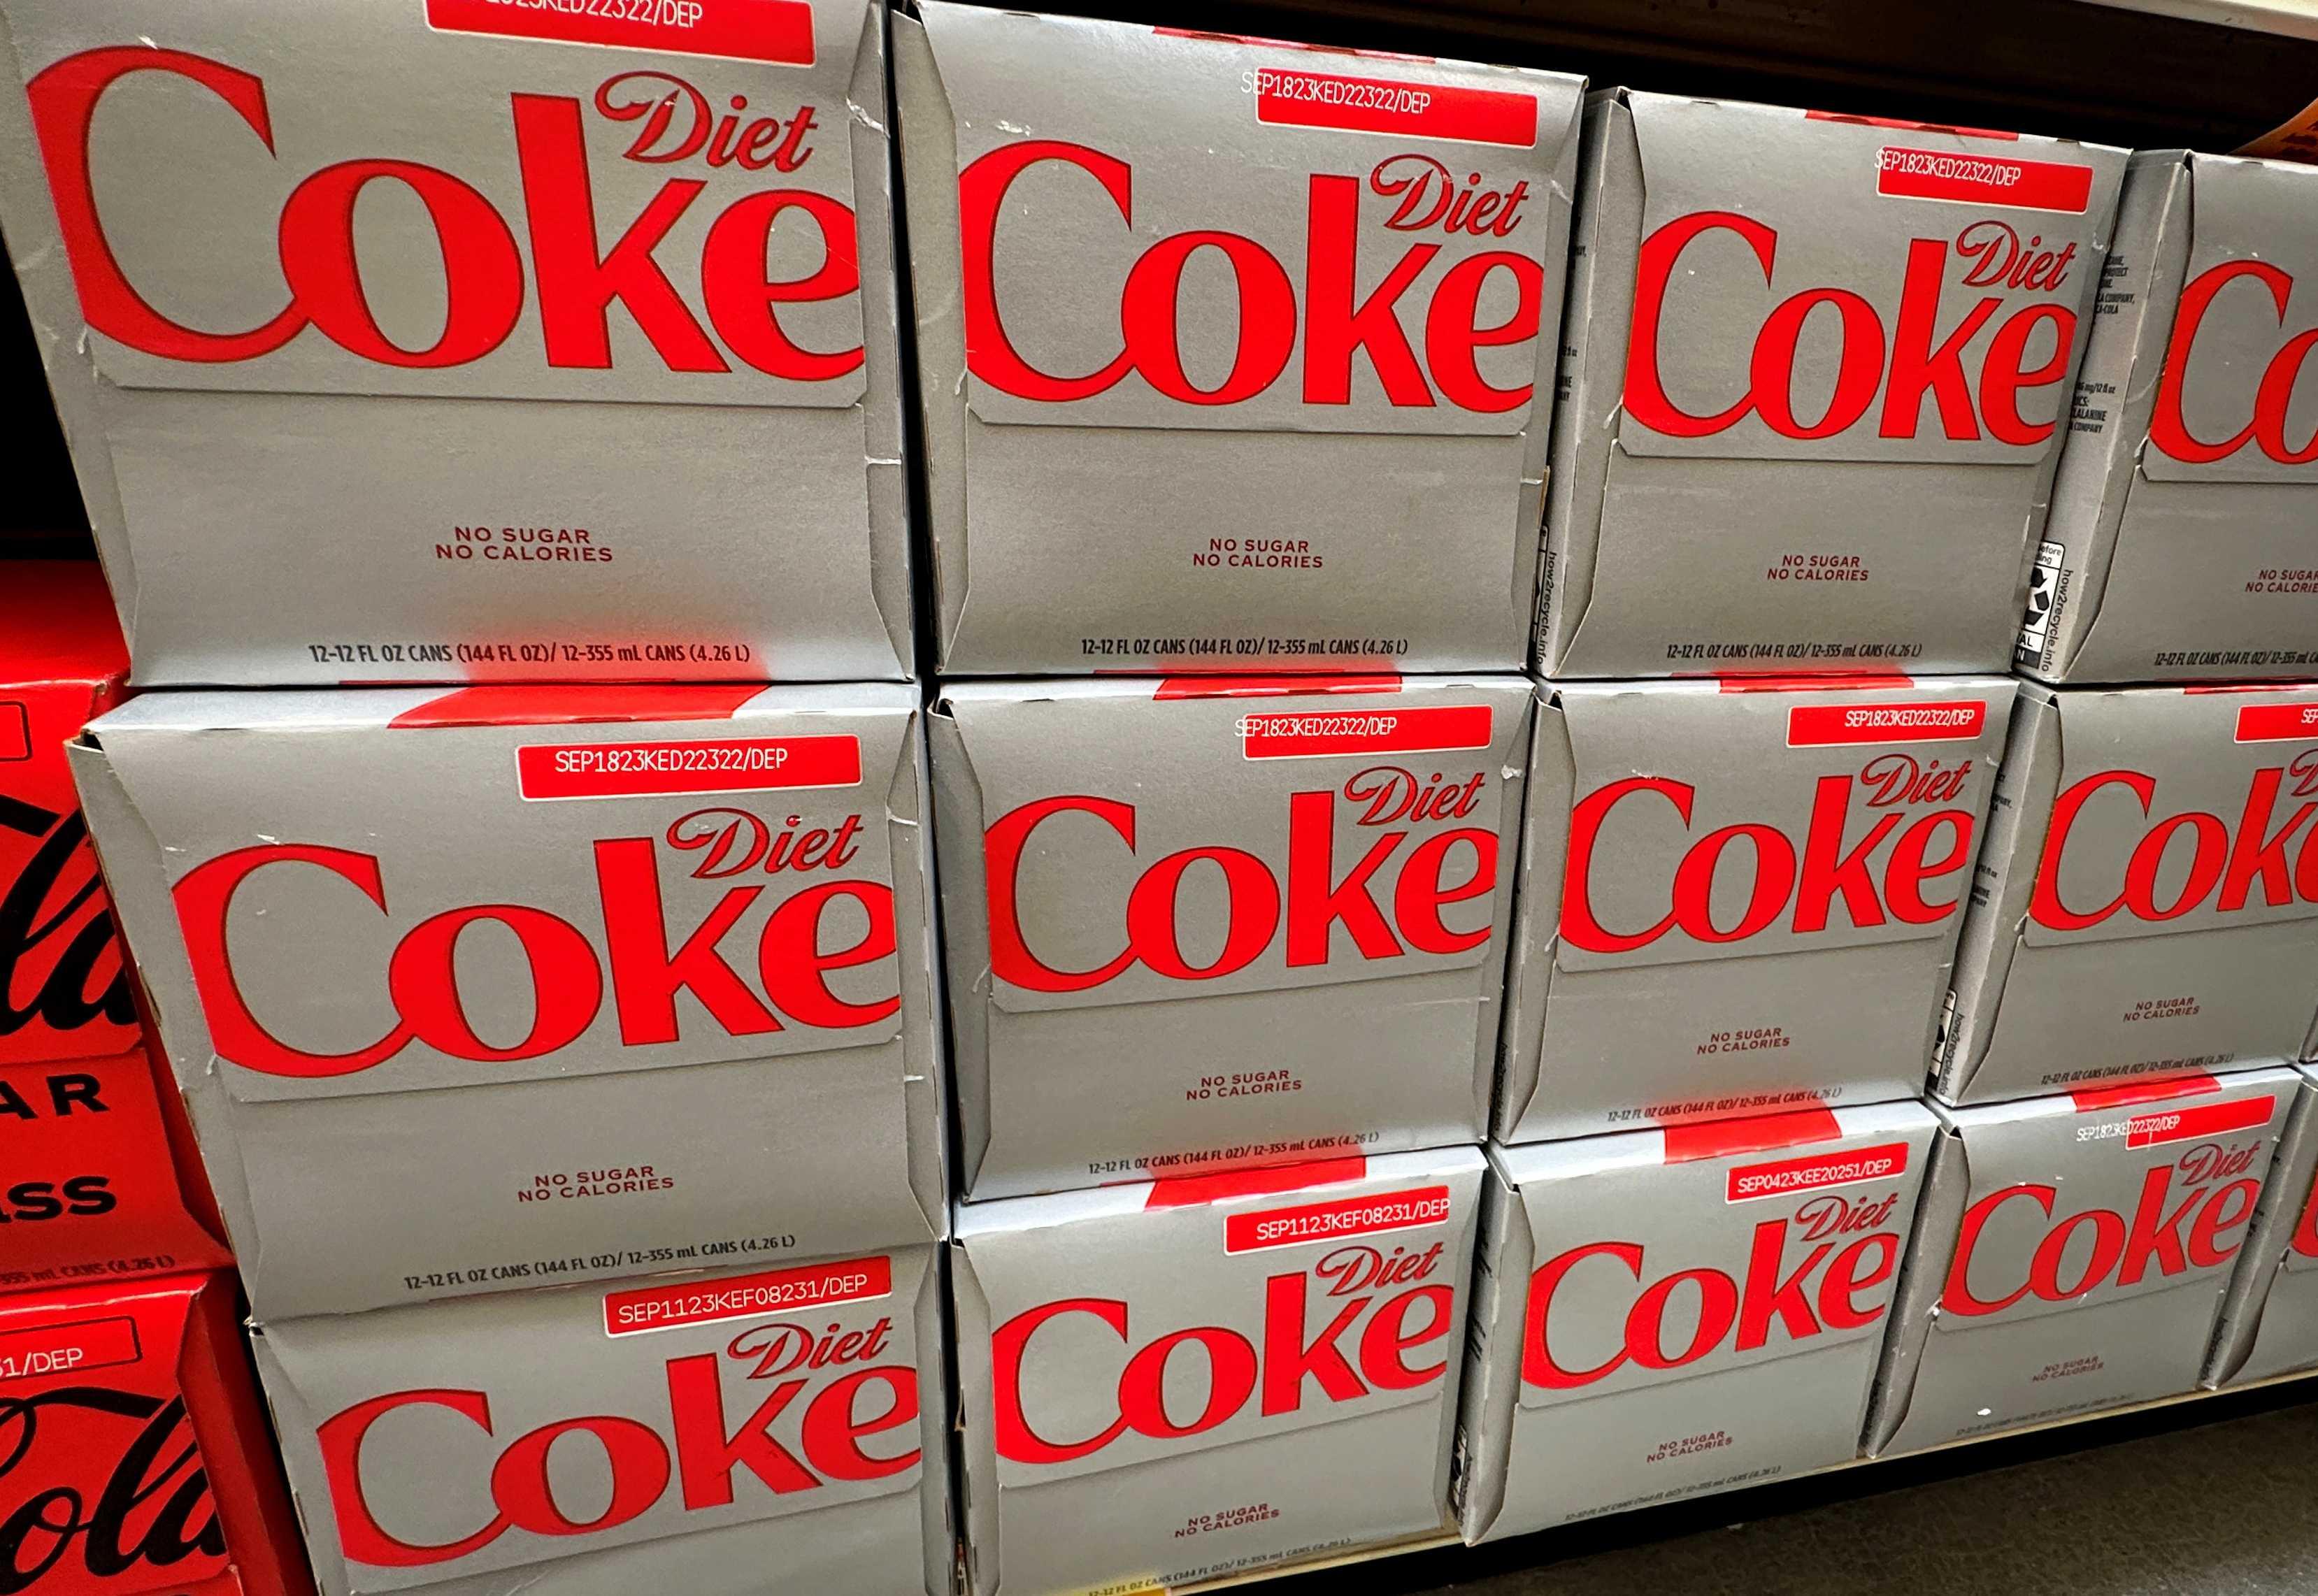 Packages of Diet Coke are seen on display at a market in New York City, New York, US, June 28. Photo: Reuters